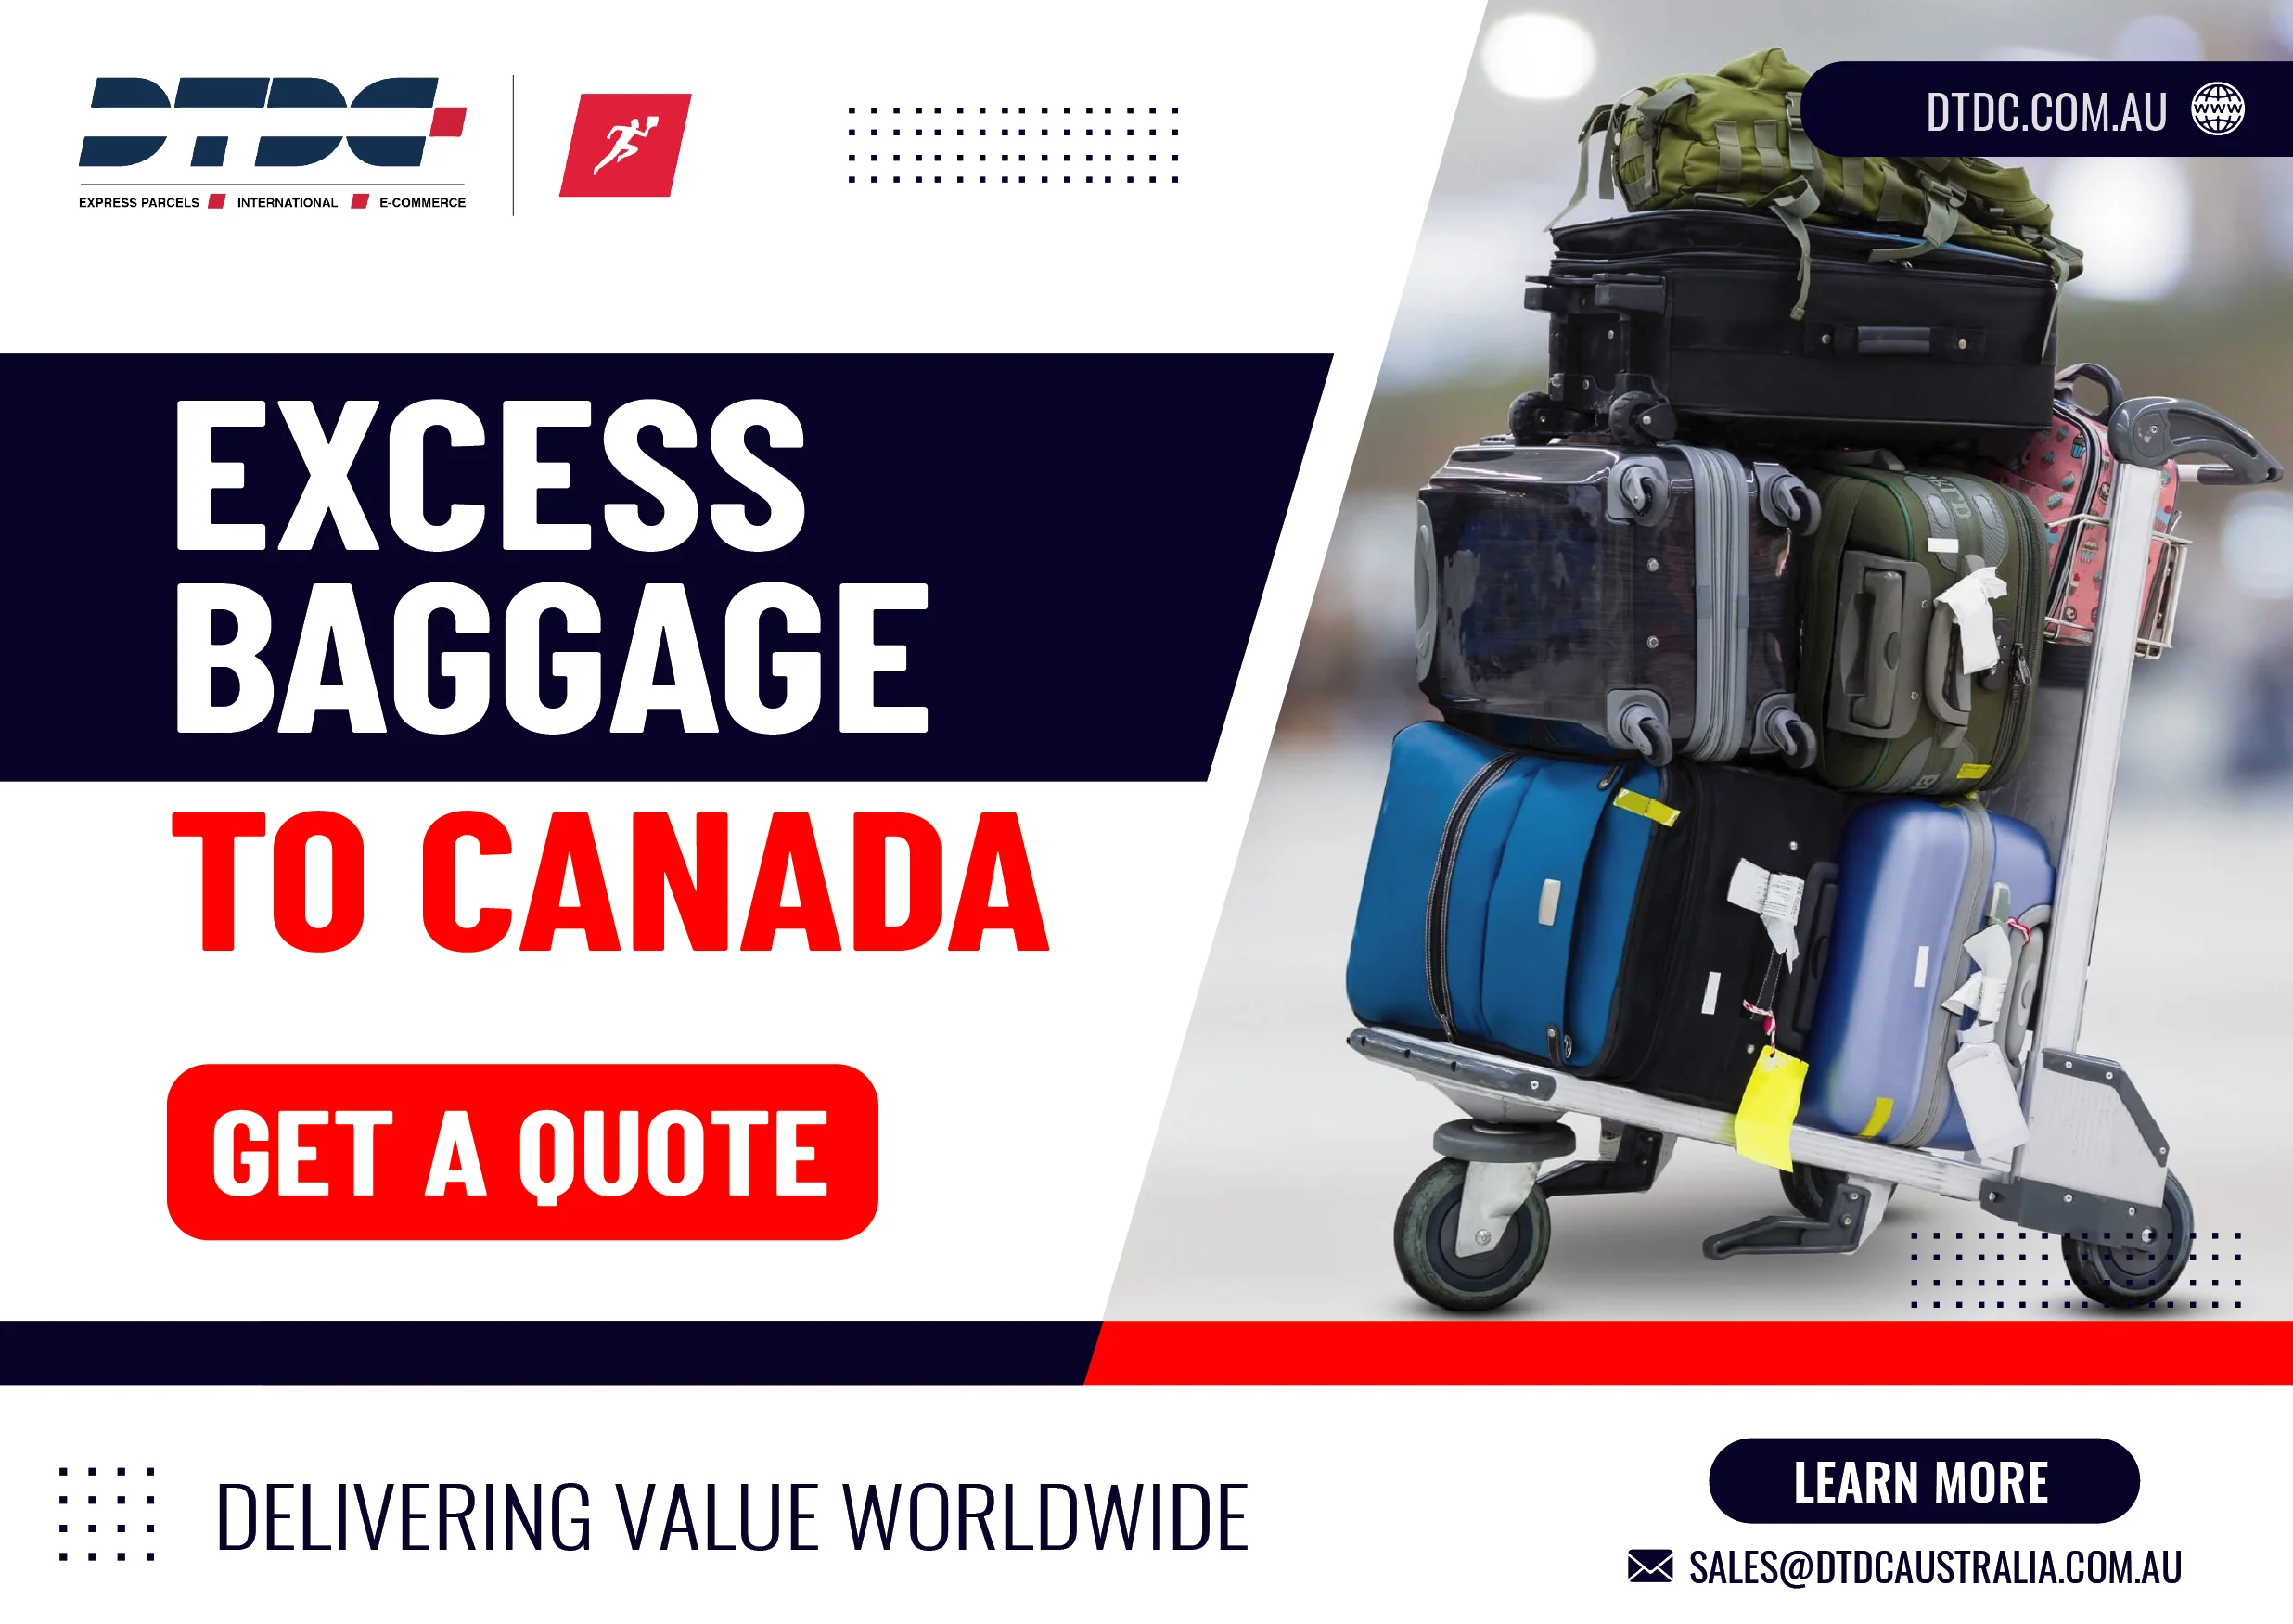 Excess Baggage to Canada, Get a quote